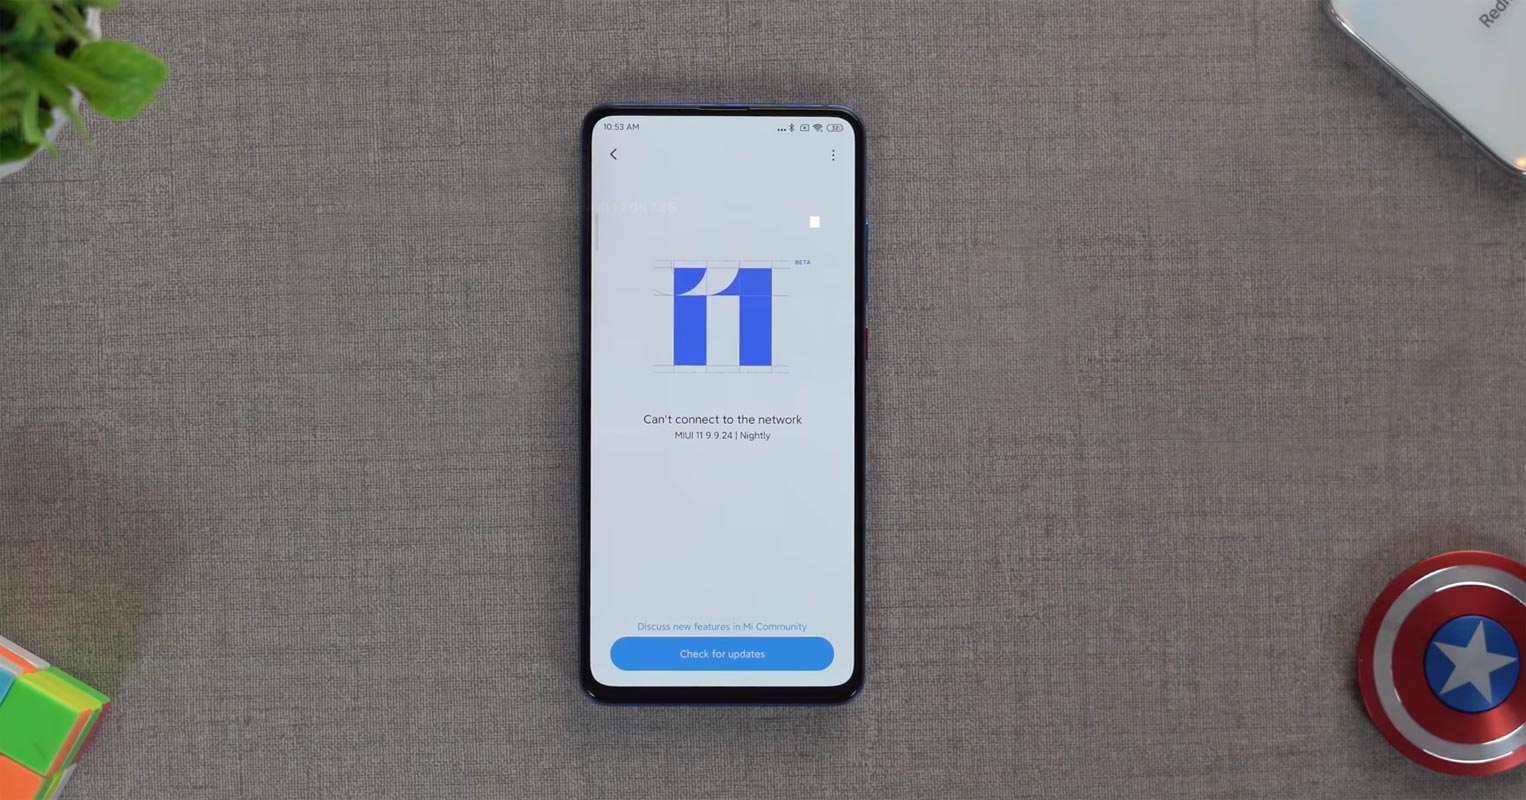 MIUI 11 OS information in Display